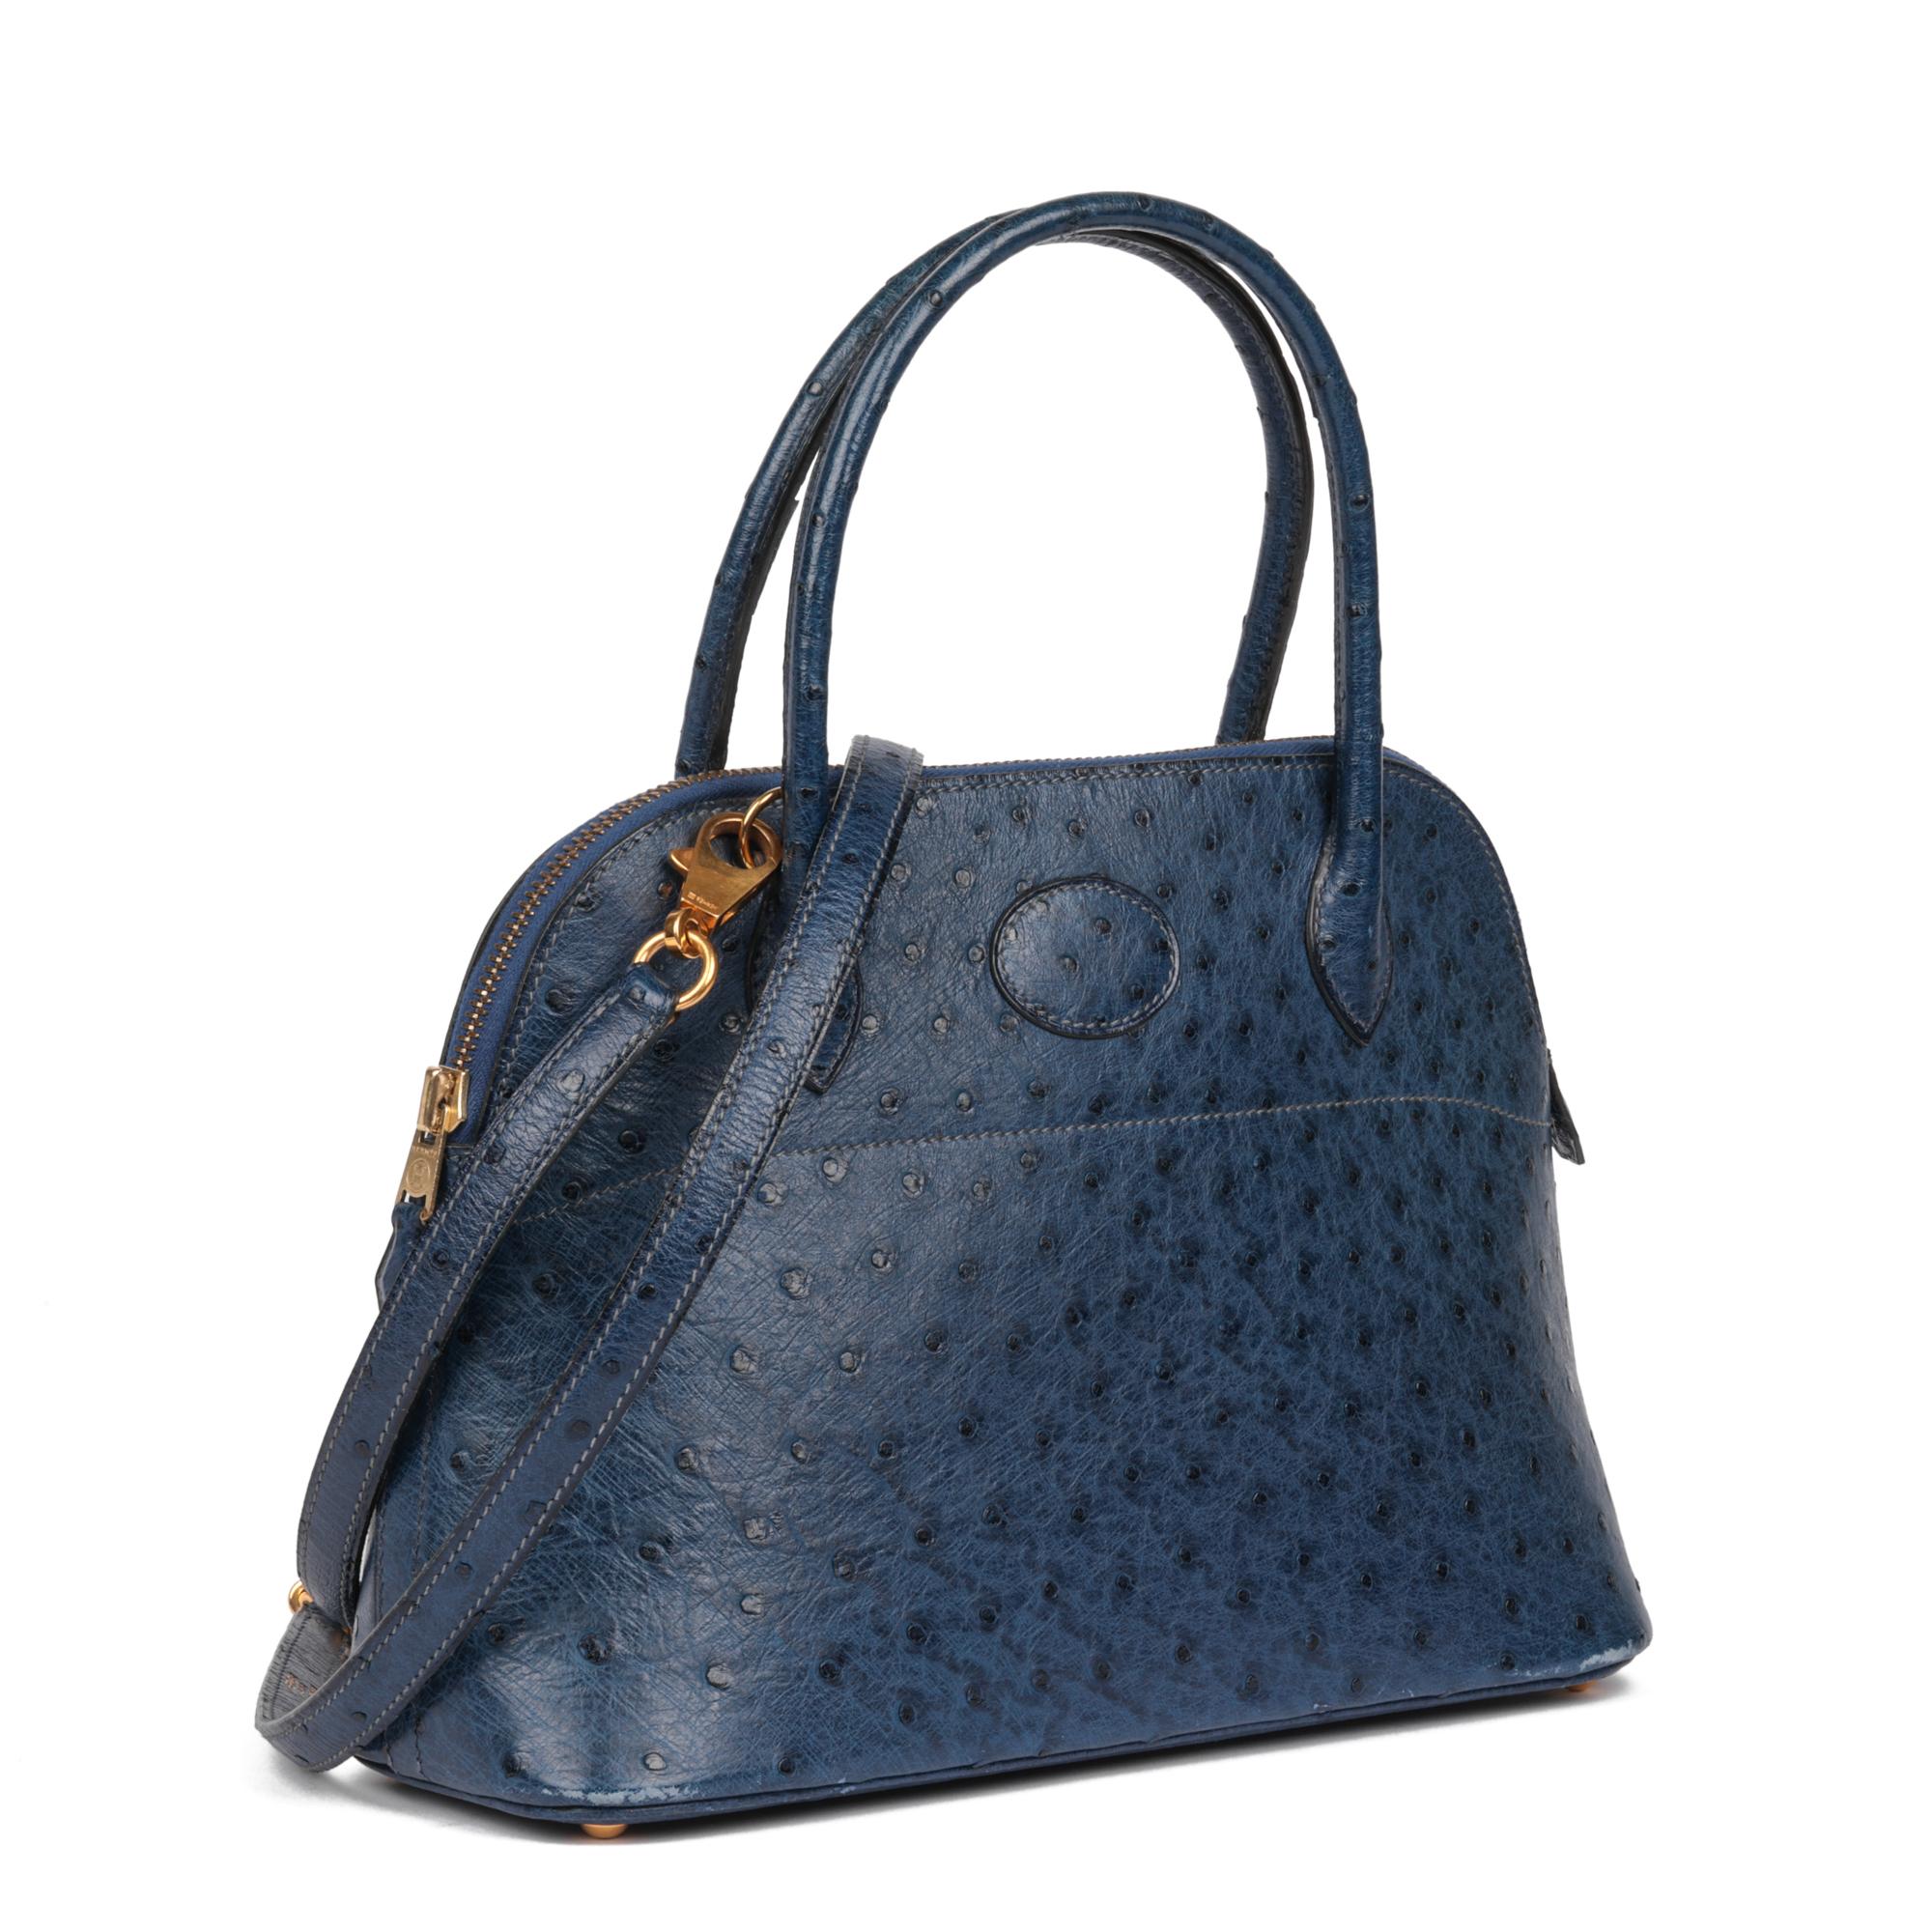 HERMÈS
Bleu Saphir Ostrich Leather Vintage Bolide 27

Xupes Reference: CB848
Serial Number: (W)
Age (Circa): 1993
Accompanied By: Shoulder Strap
Authenticity Details: Date Stamp (Made in France)
Gender: Ladies
Type: Tote, Shoulder

Colour: Bleu